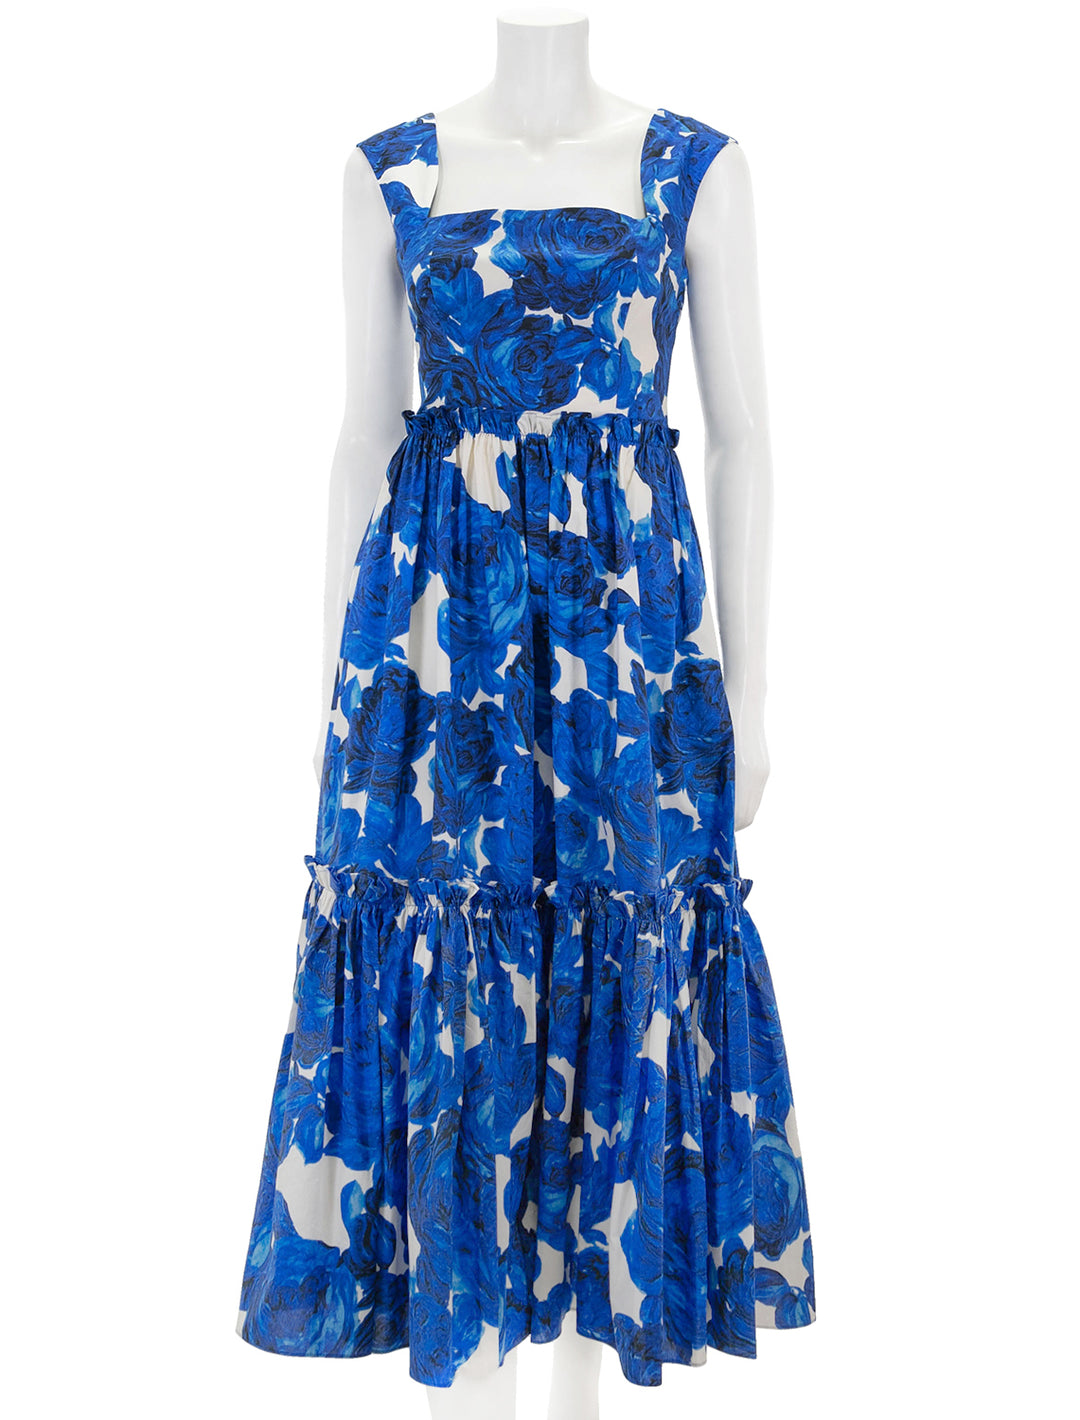 Front view of Cara Cara's claire dress in floral garden blue.